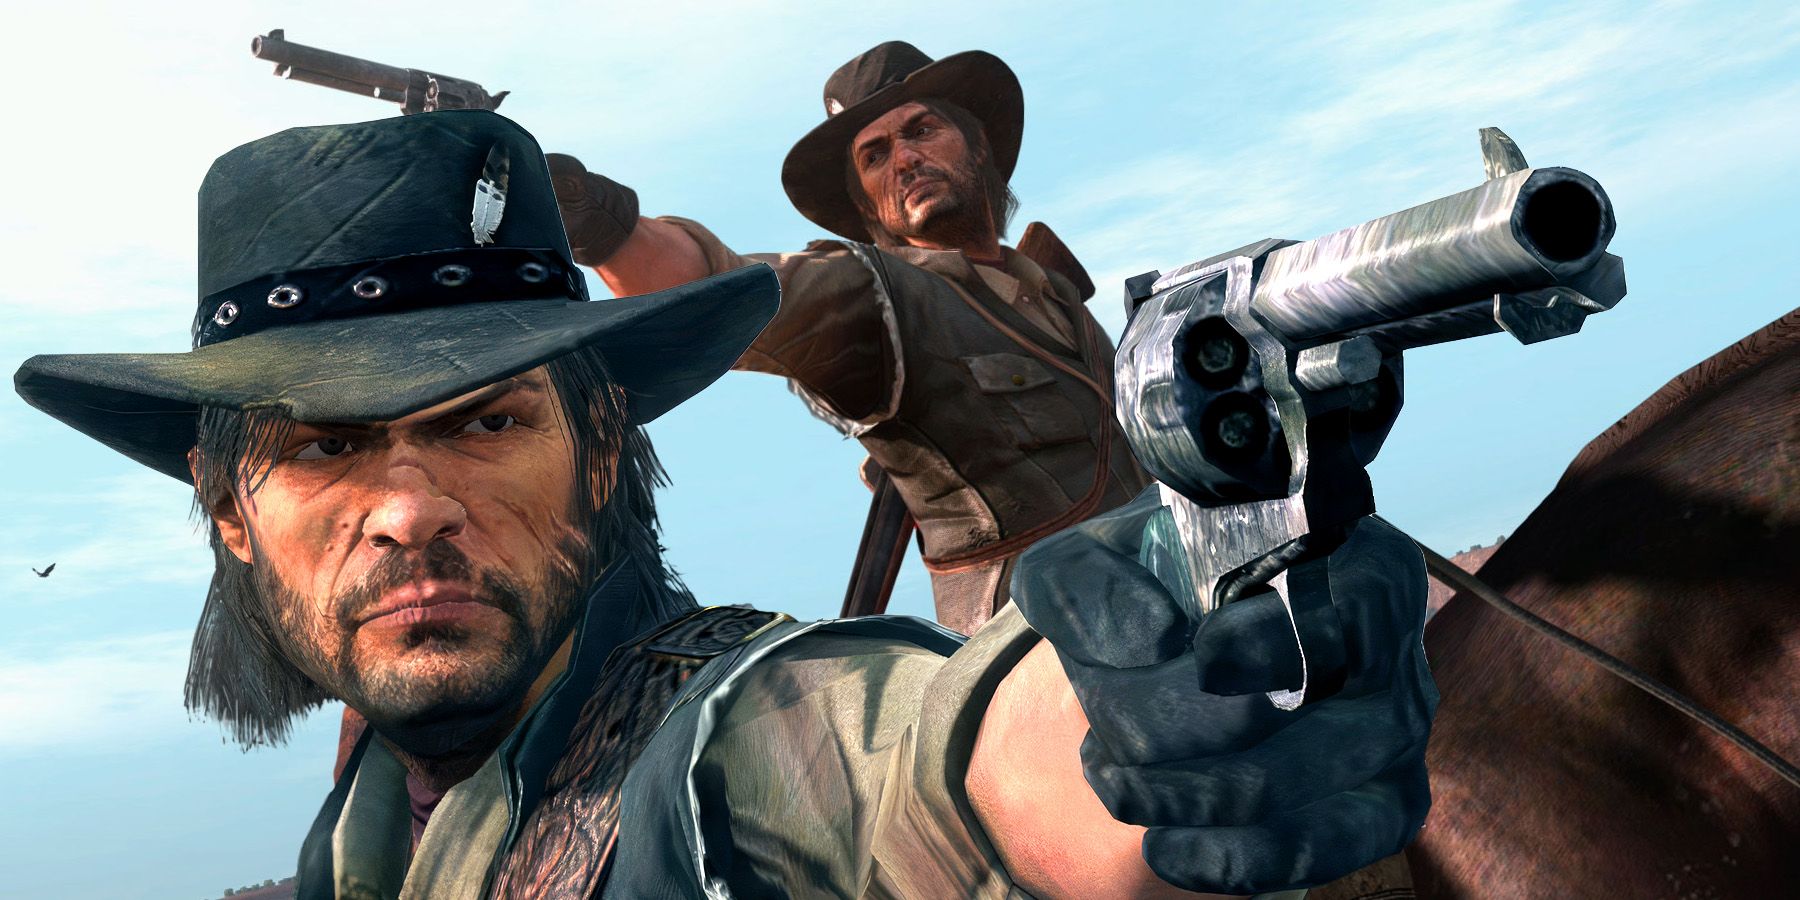 Red Dead Redemption Comparison - PS4 / Nintendo Switch / Xbox One